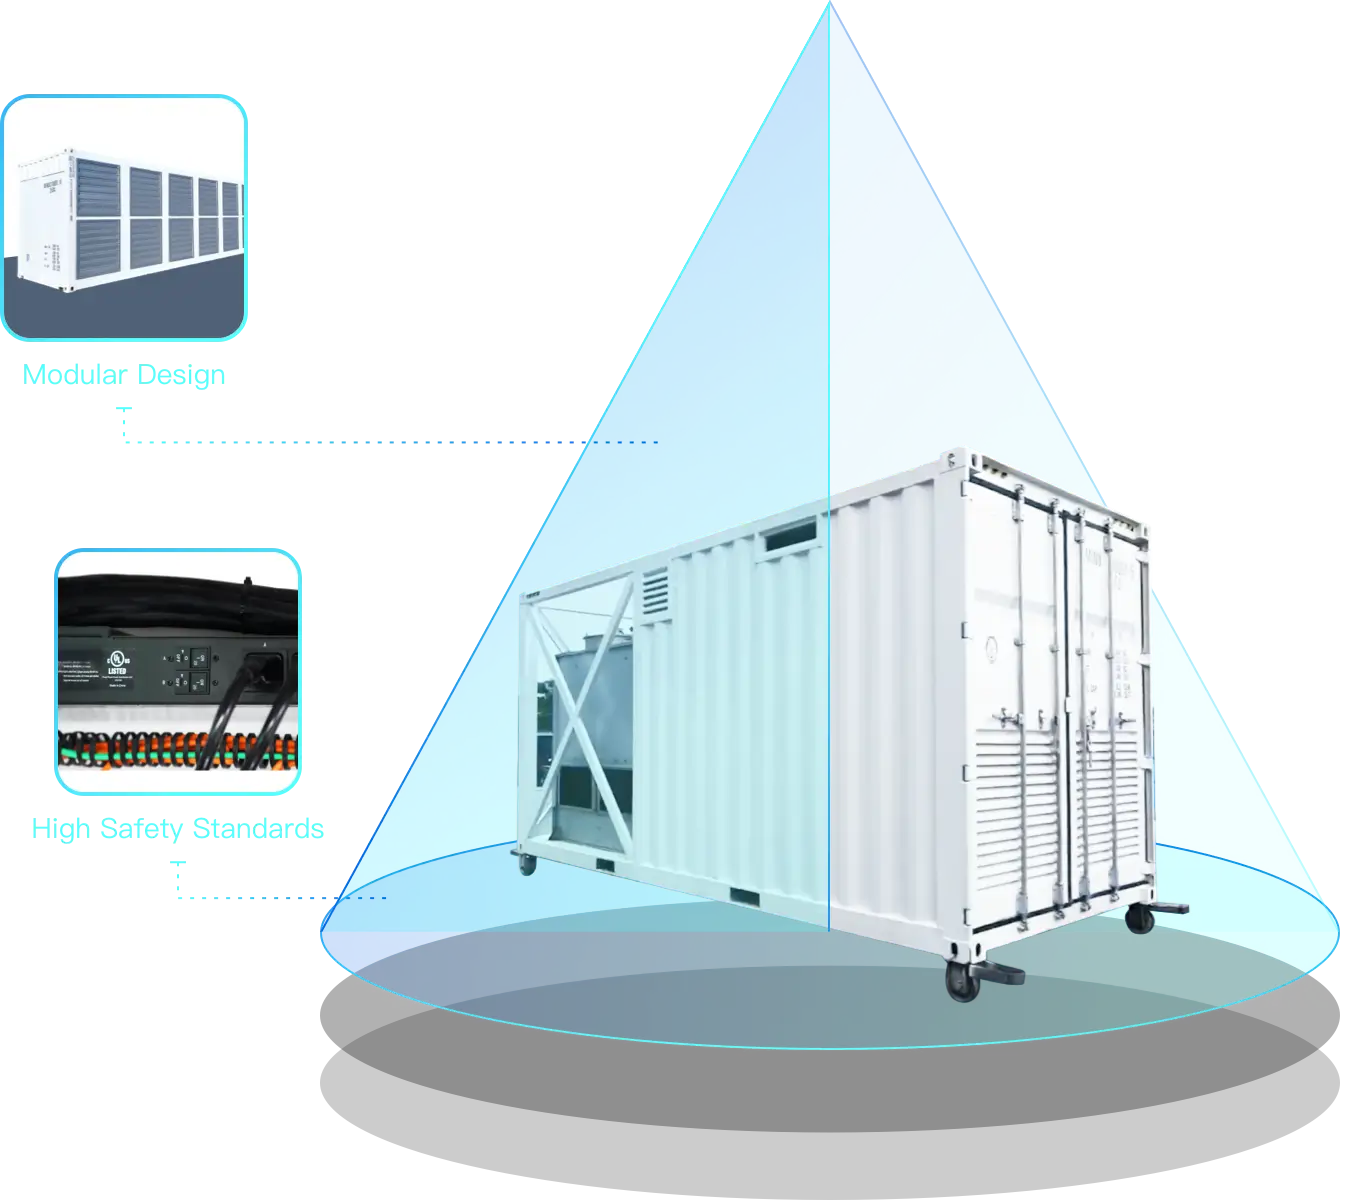 Modular design concept of Minerbase mining containers